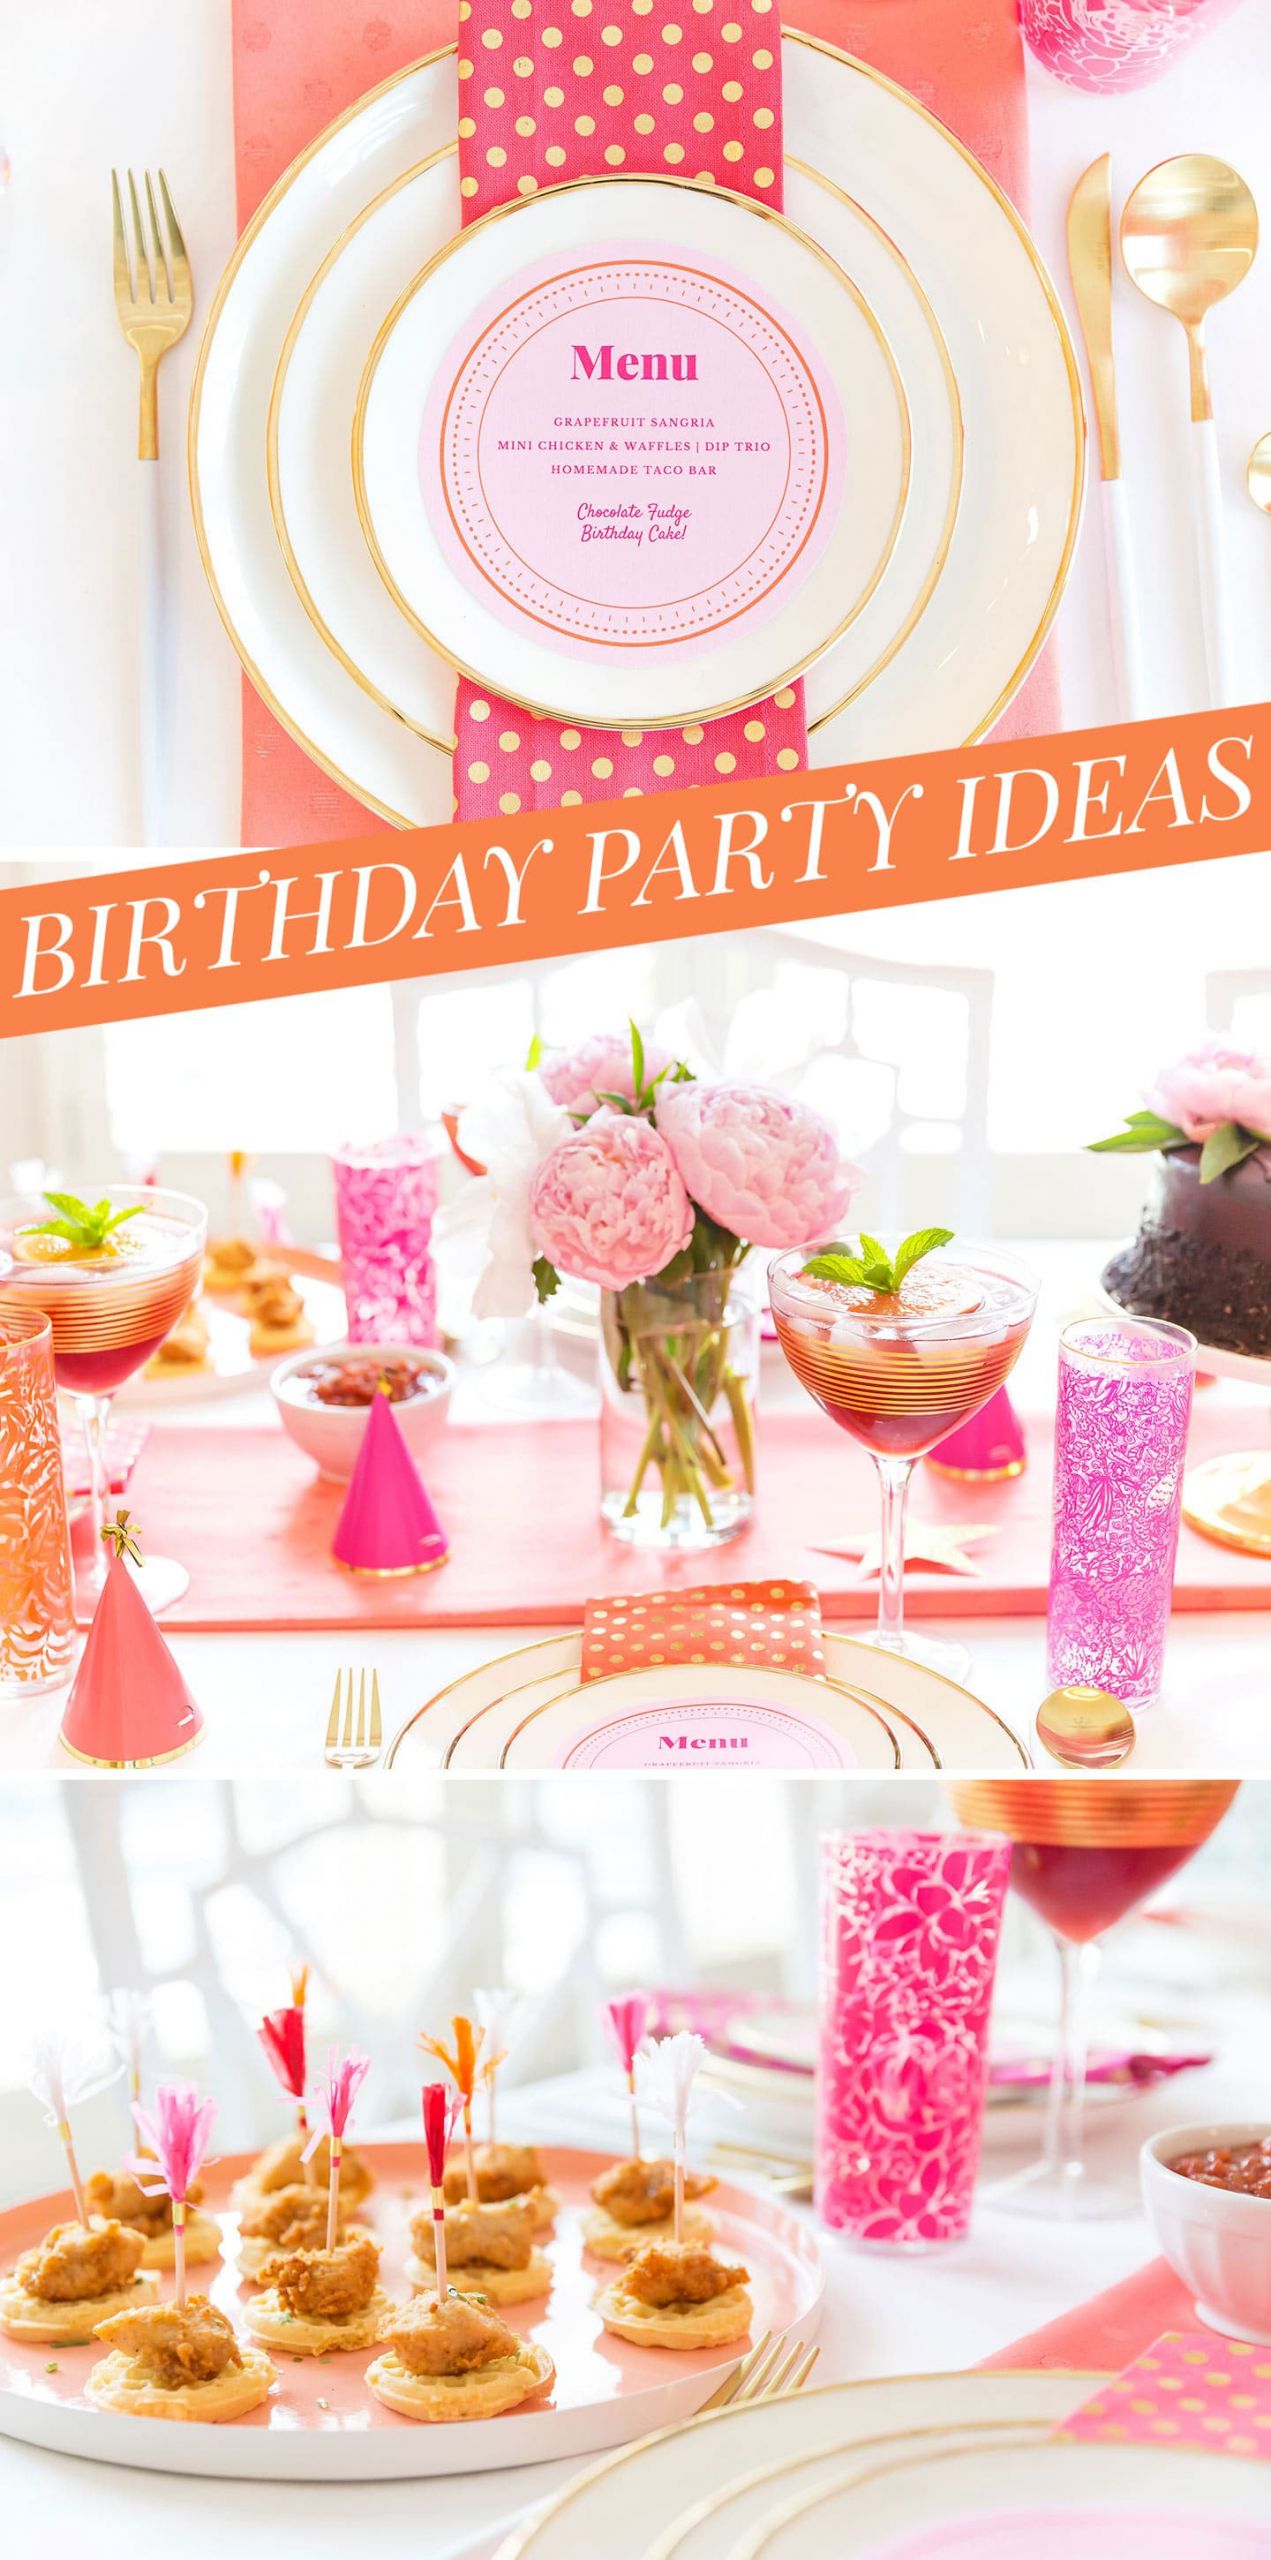 Birthday Gift Ideas For Adults
 Creative Adult Birthday Party Ideas for the Girls